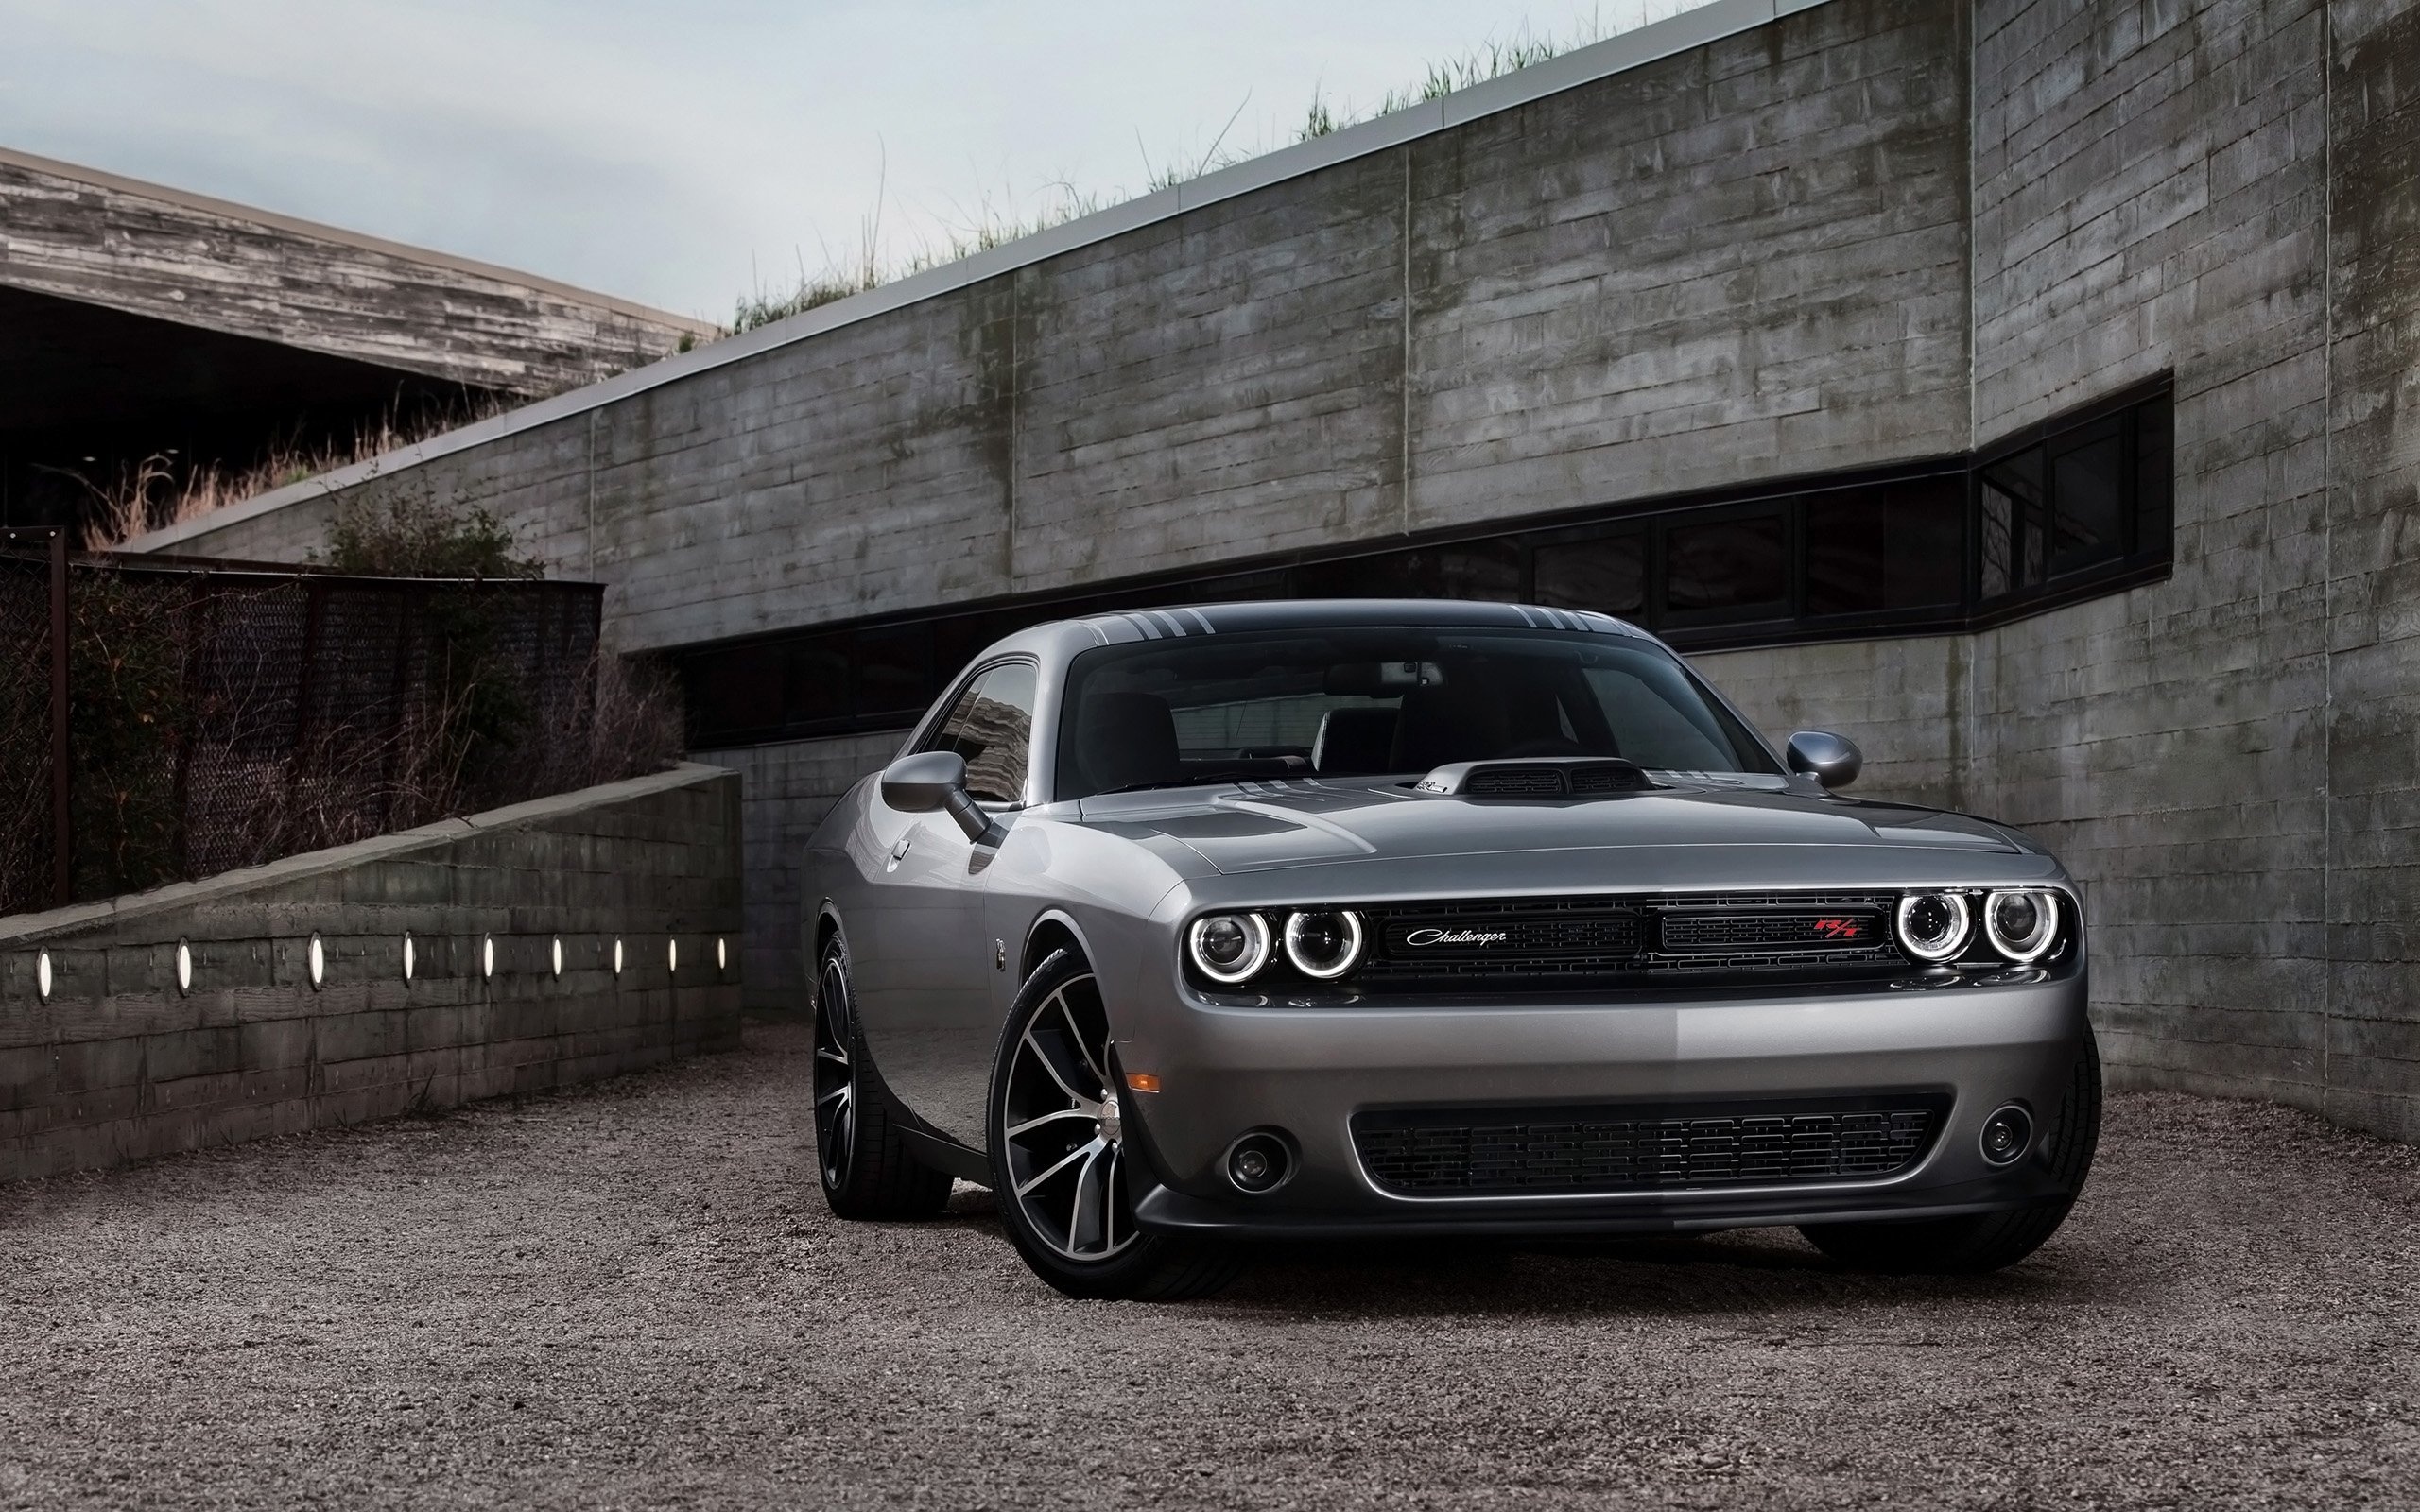 Dodge Challenger, Iconic muscle car, Powerful performance, Aggressive design, 2560x1600 HD Desktop